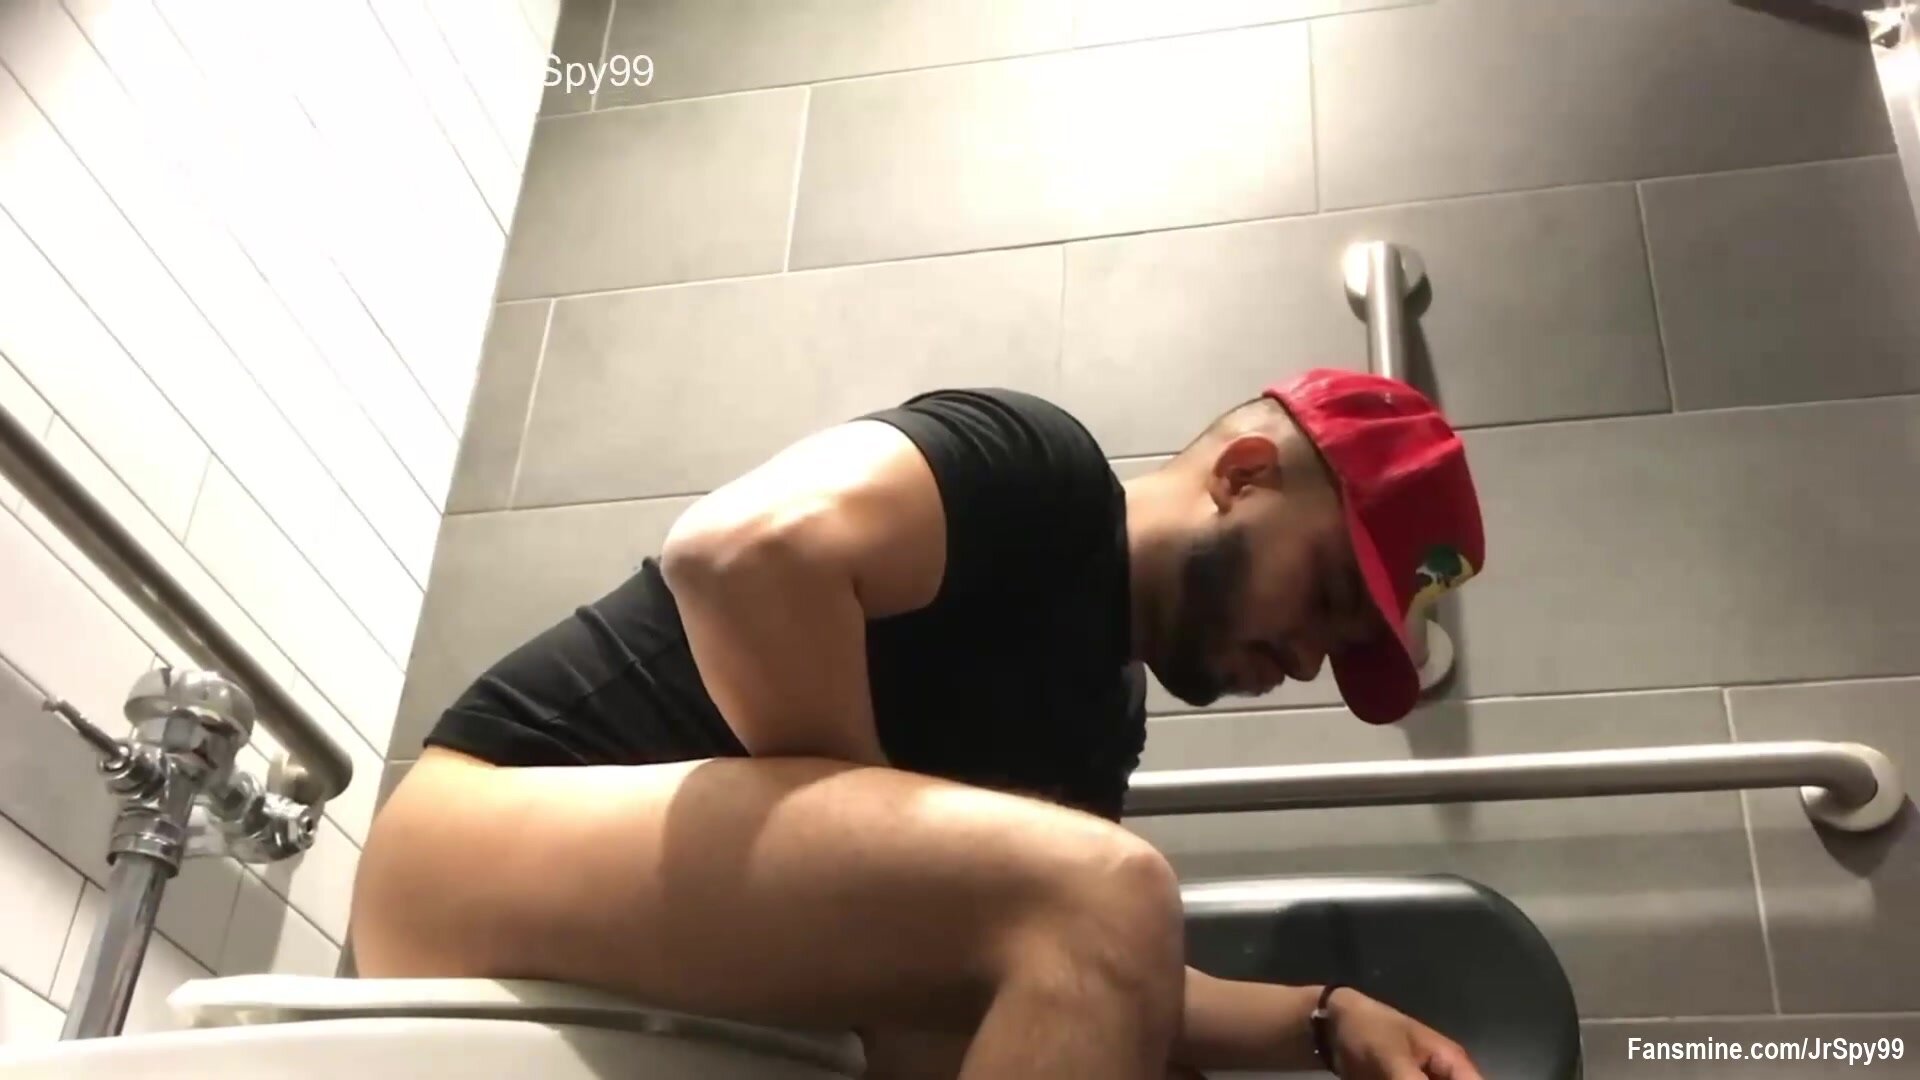 Spy Hot guy on the toilet with wipe hq picture